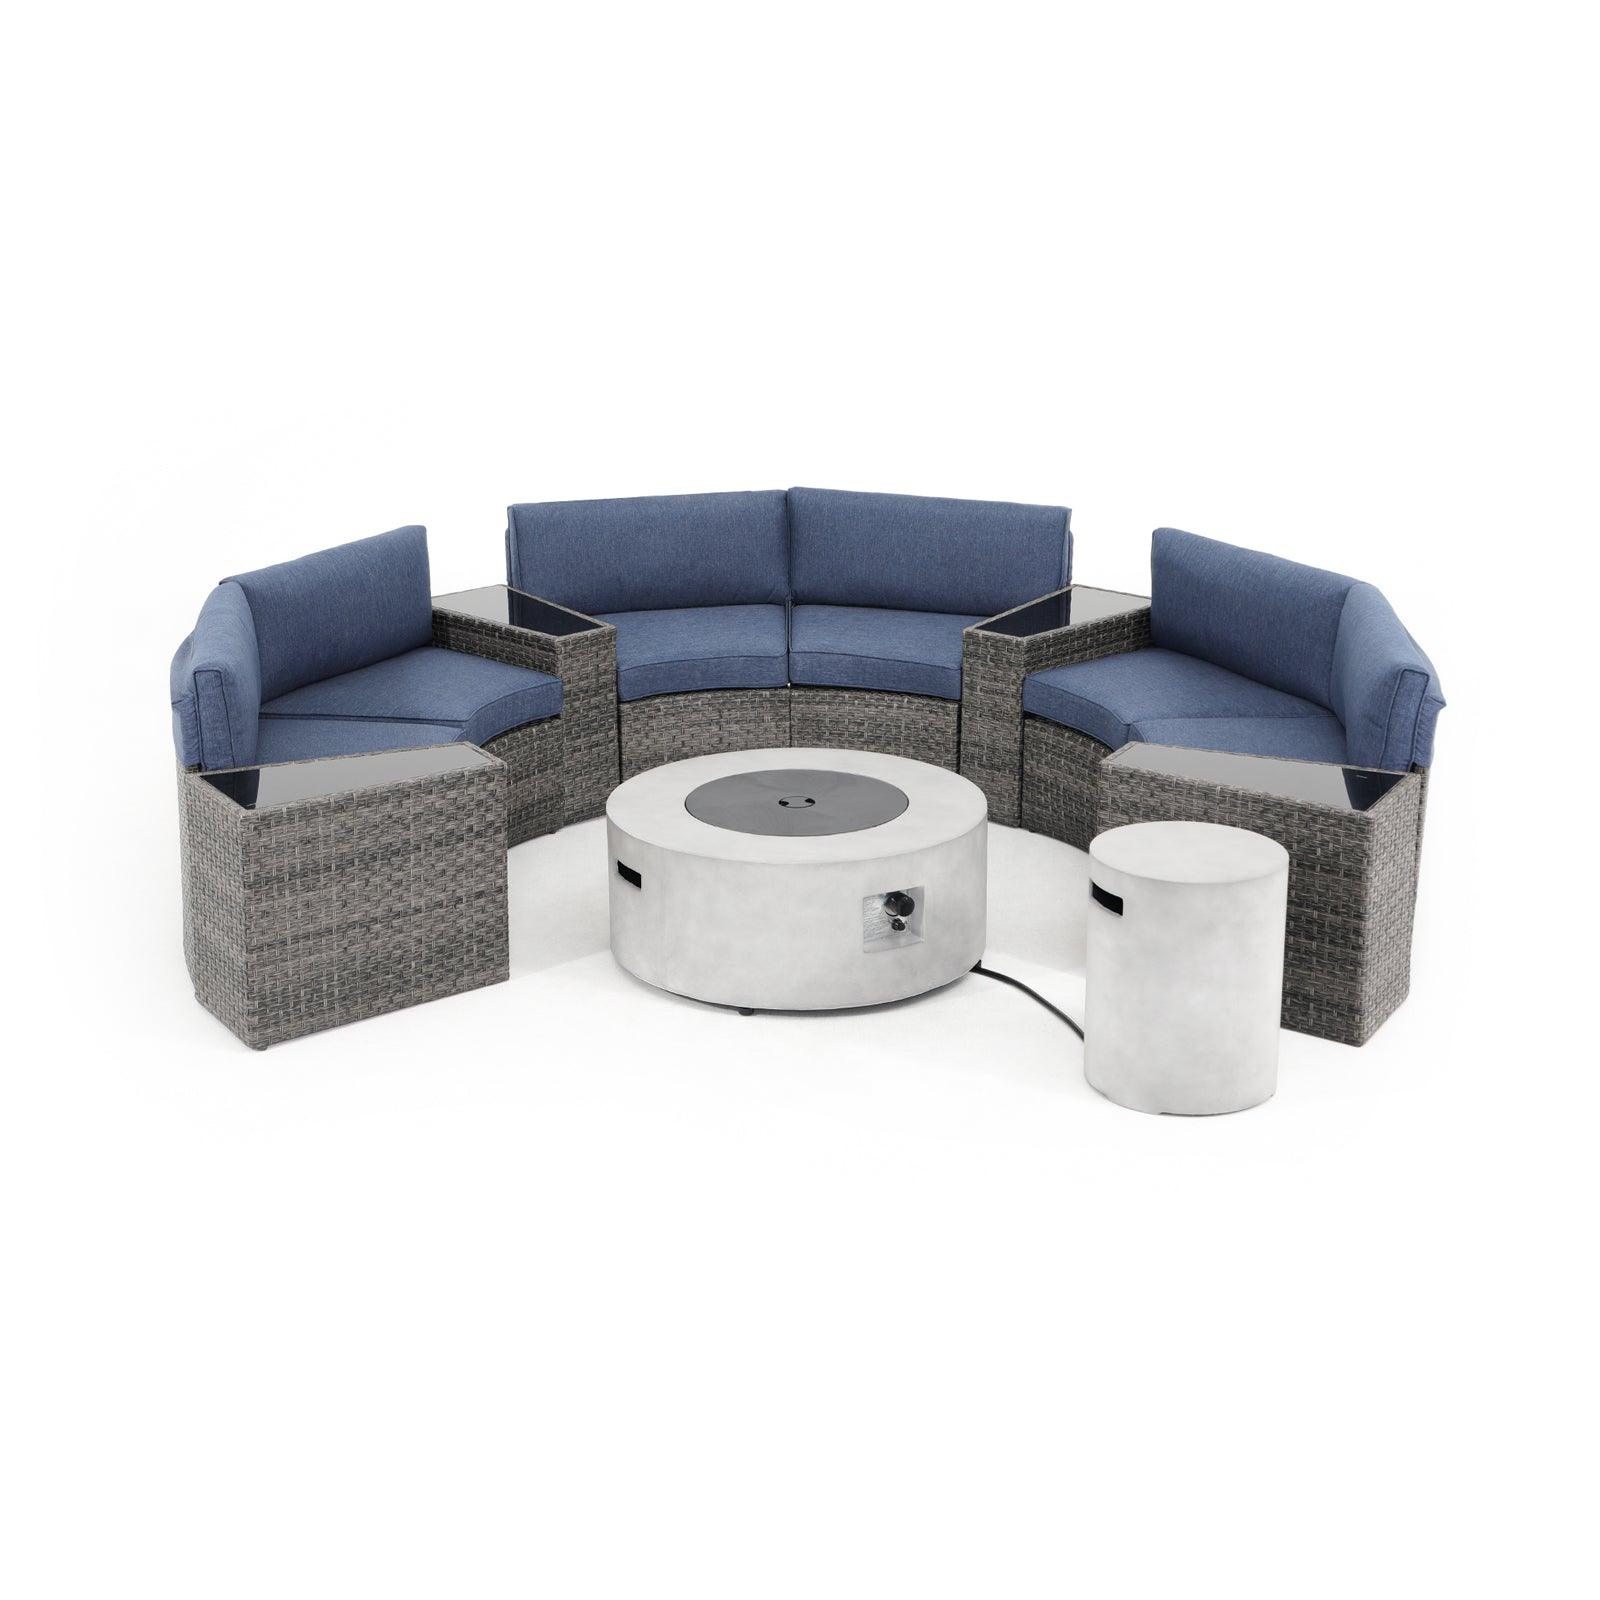 Boboli 6-seater Grey Wicker Curved Sectional sofas with navy blue cushions + 4 side tables + 1 grey Propane Fire Pit with tank holder and a lid, front view- Jardina Furniture#color_Navy Blue #piece_11-pc.